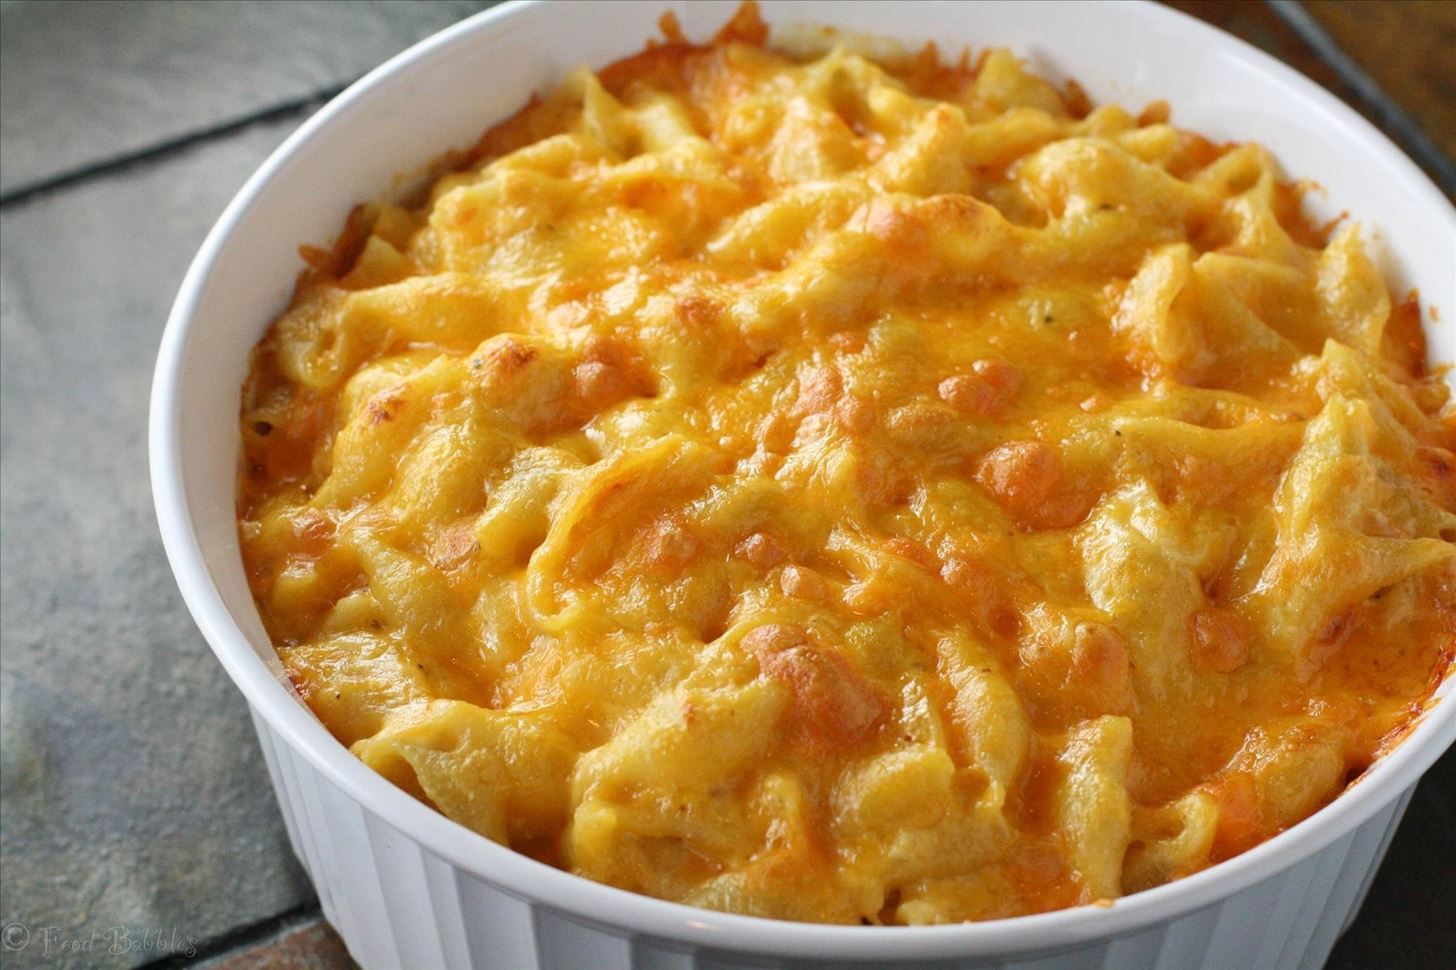 The Essential Secrets for Amazing Homemade Mac & Cheese